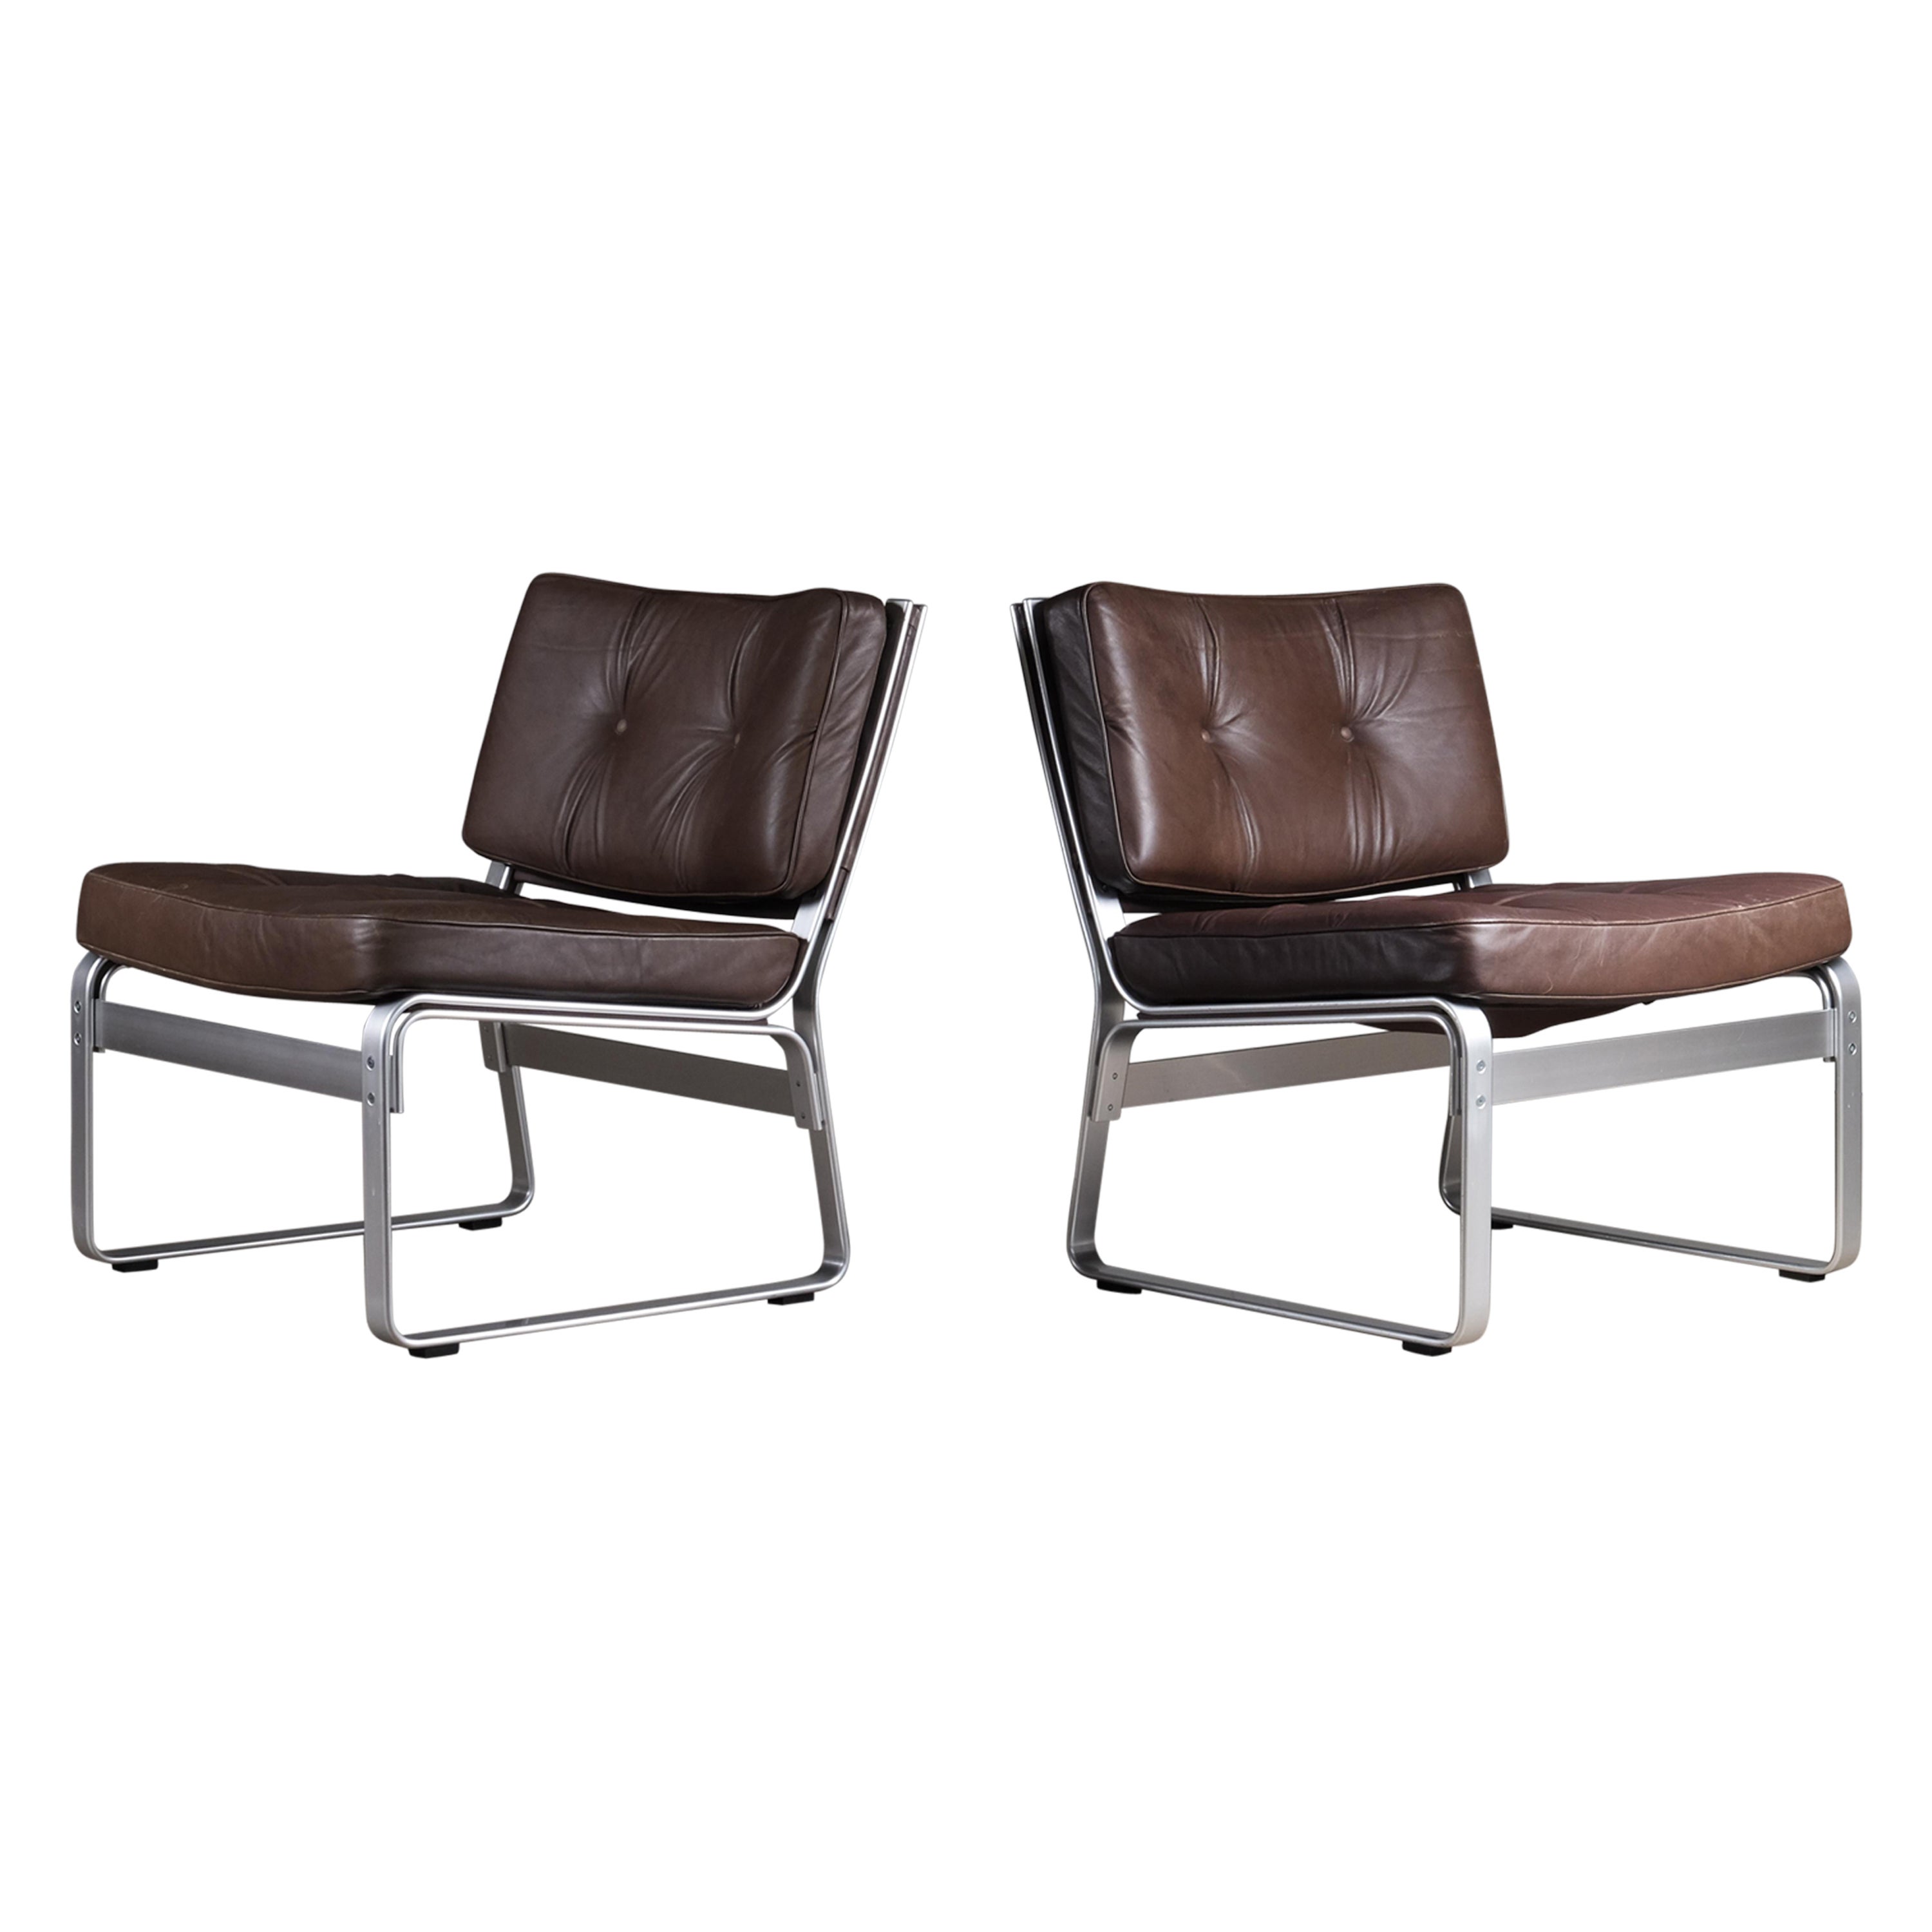 Set of 3 "Mondo" Lounge Chairs by Karl-Erik Ekselius, Sweden, 1970s For Sale